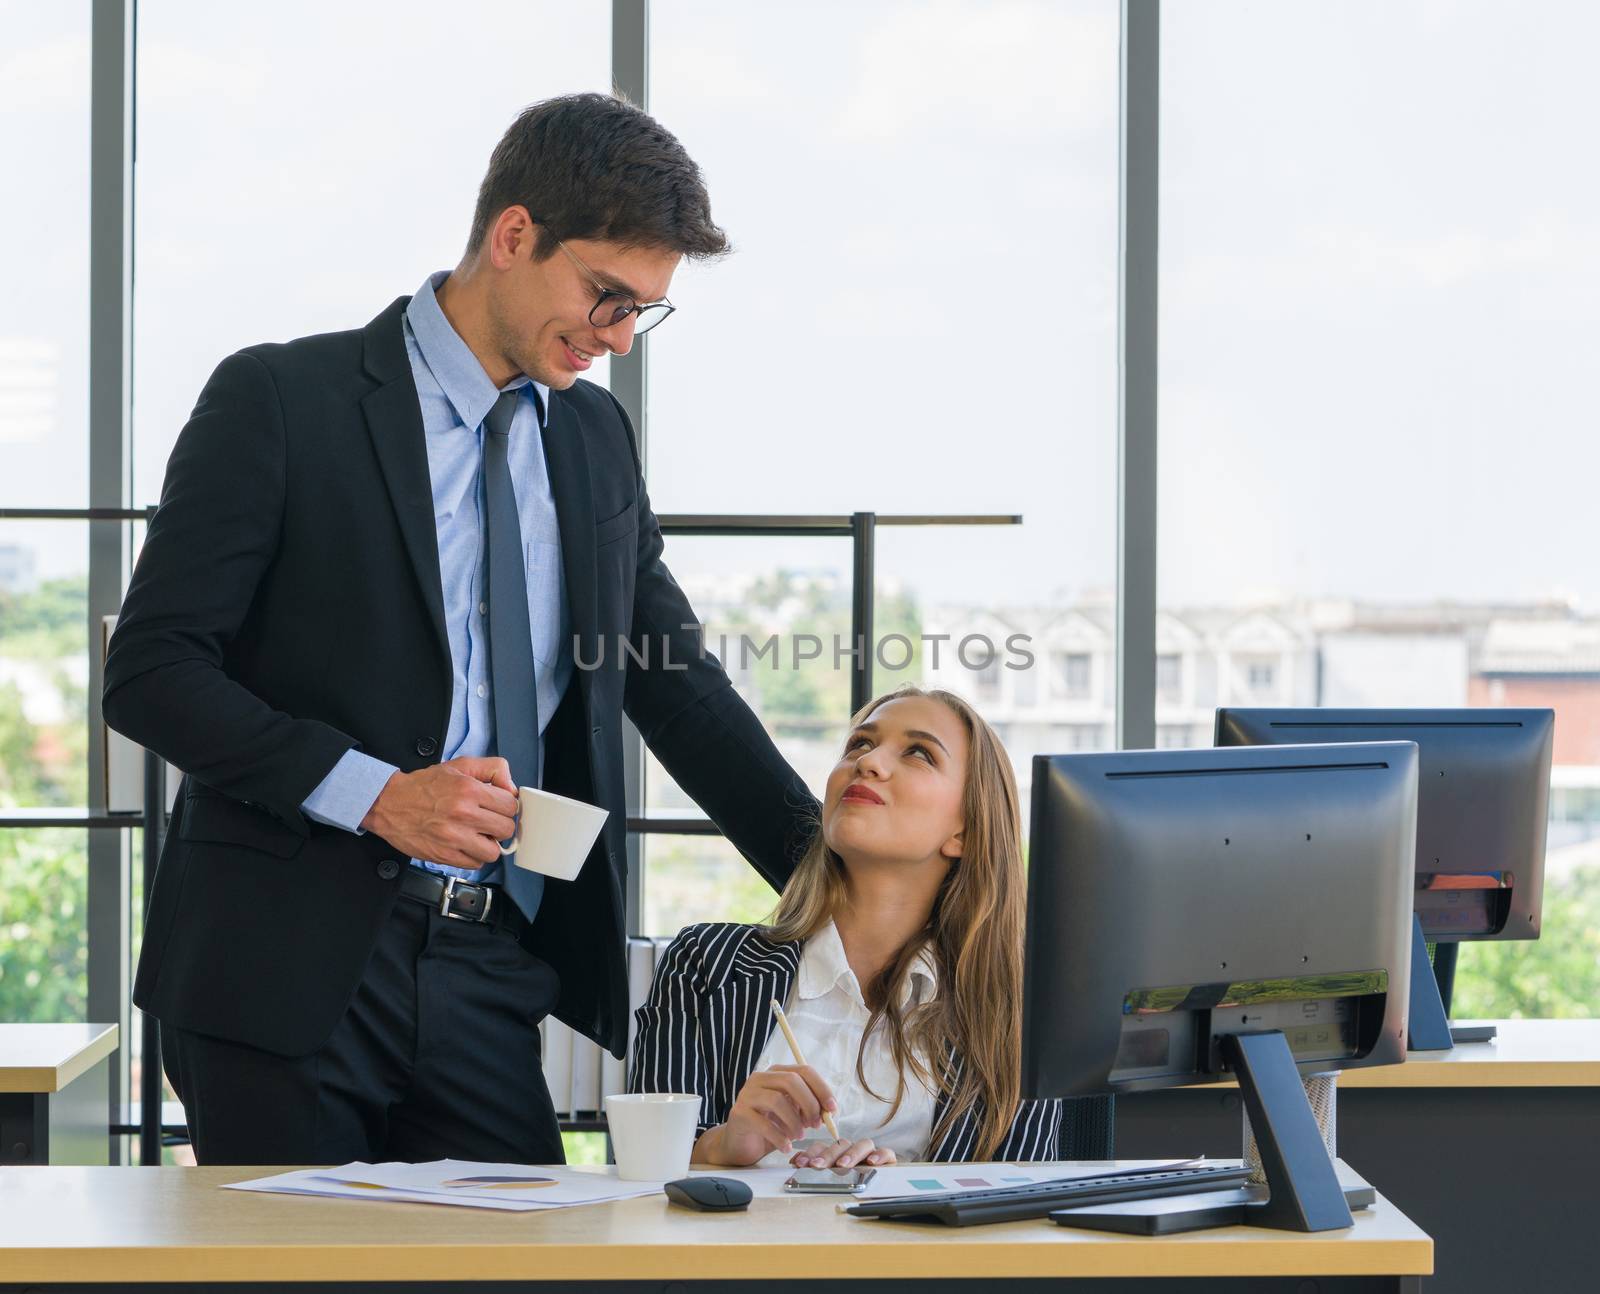 Young couples spend coffee breaks together in the modern office. Both made eye contact and smiled at each other after agreeing on where to go after work.